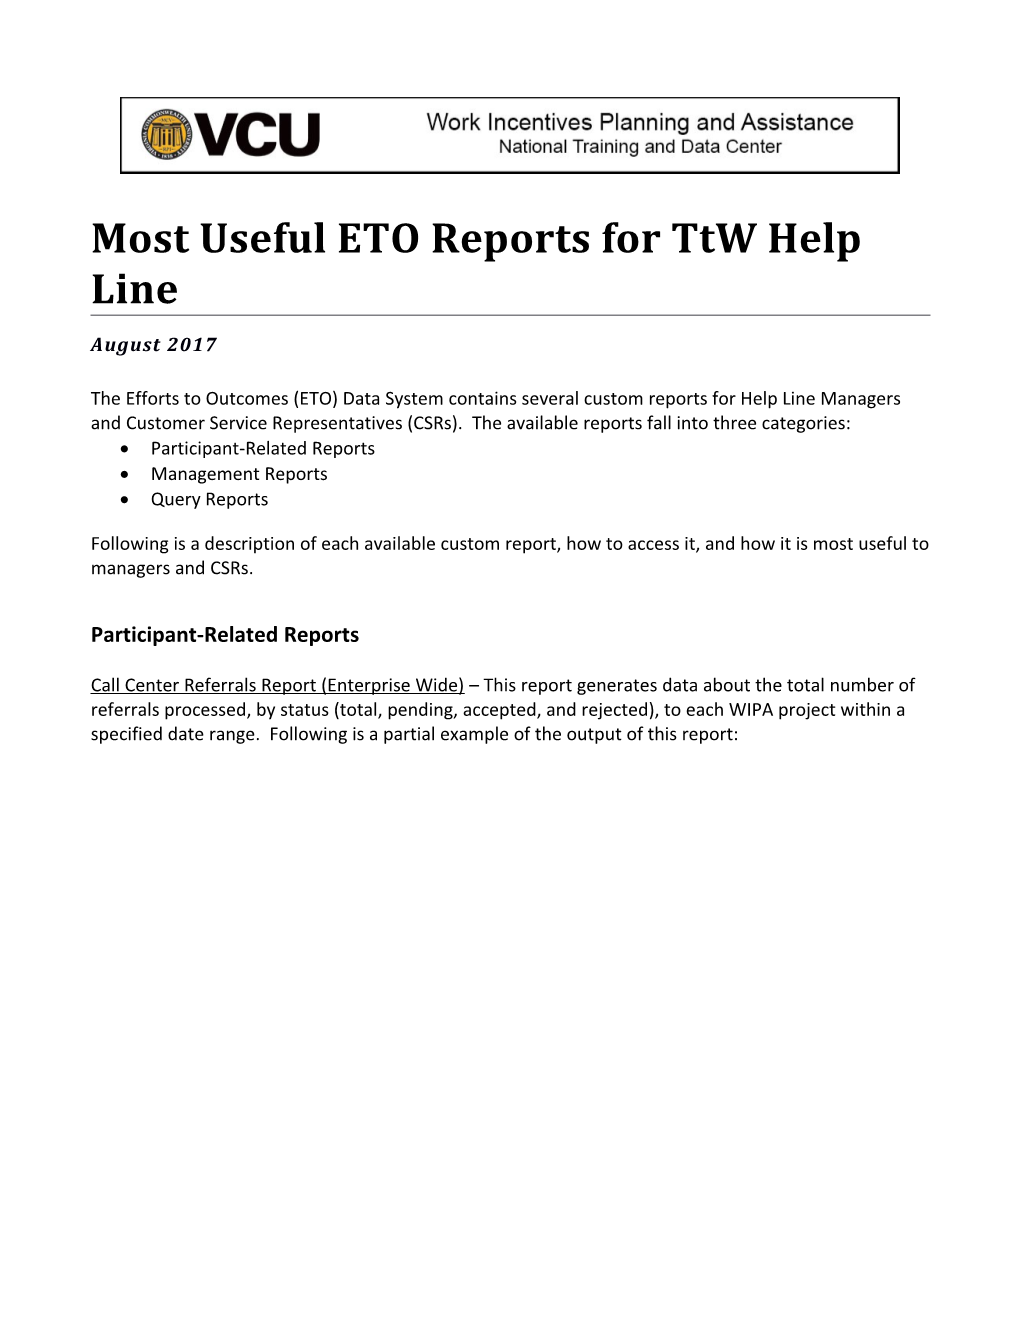 Most Useful ETO Reports for Ttw Help Line